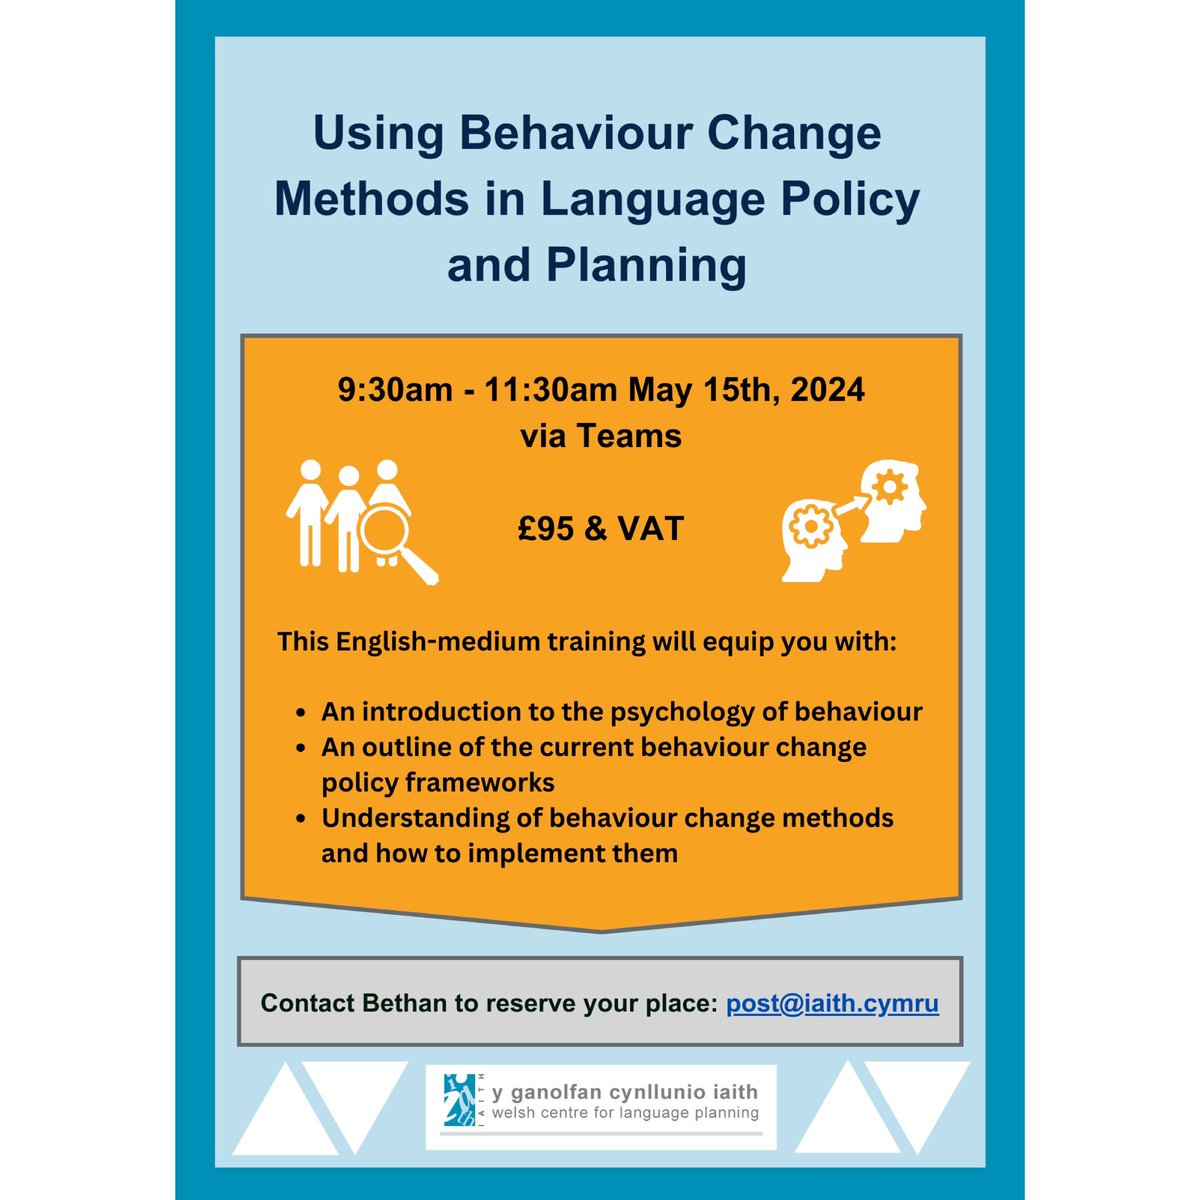 Using Behaviour Change Methods in Language Policy and Planning 9:30am - 11:30am May 15th, 2024 via Teams £95 & VAT Contact Bethan to reserve your place: post@iaith.cymru